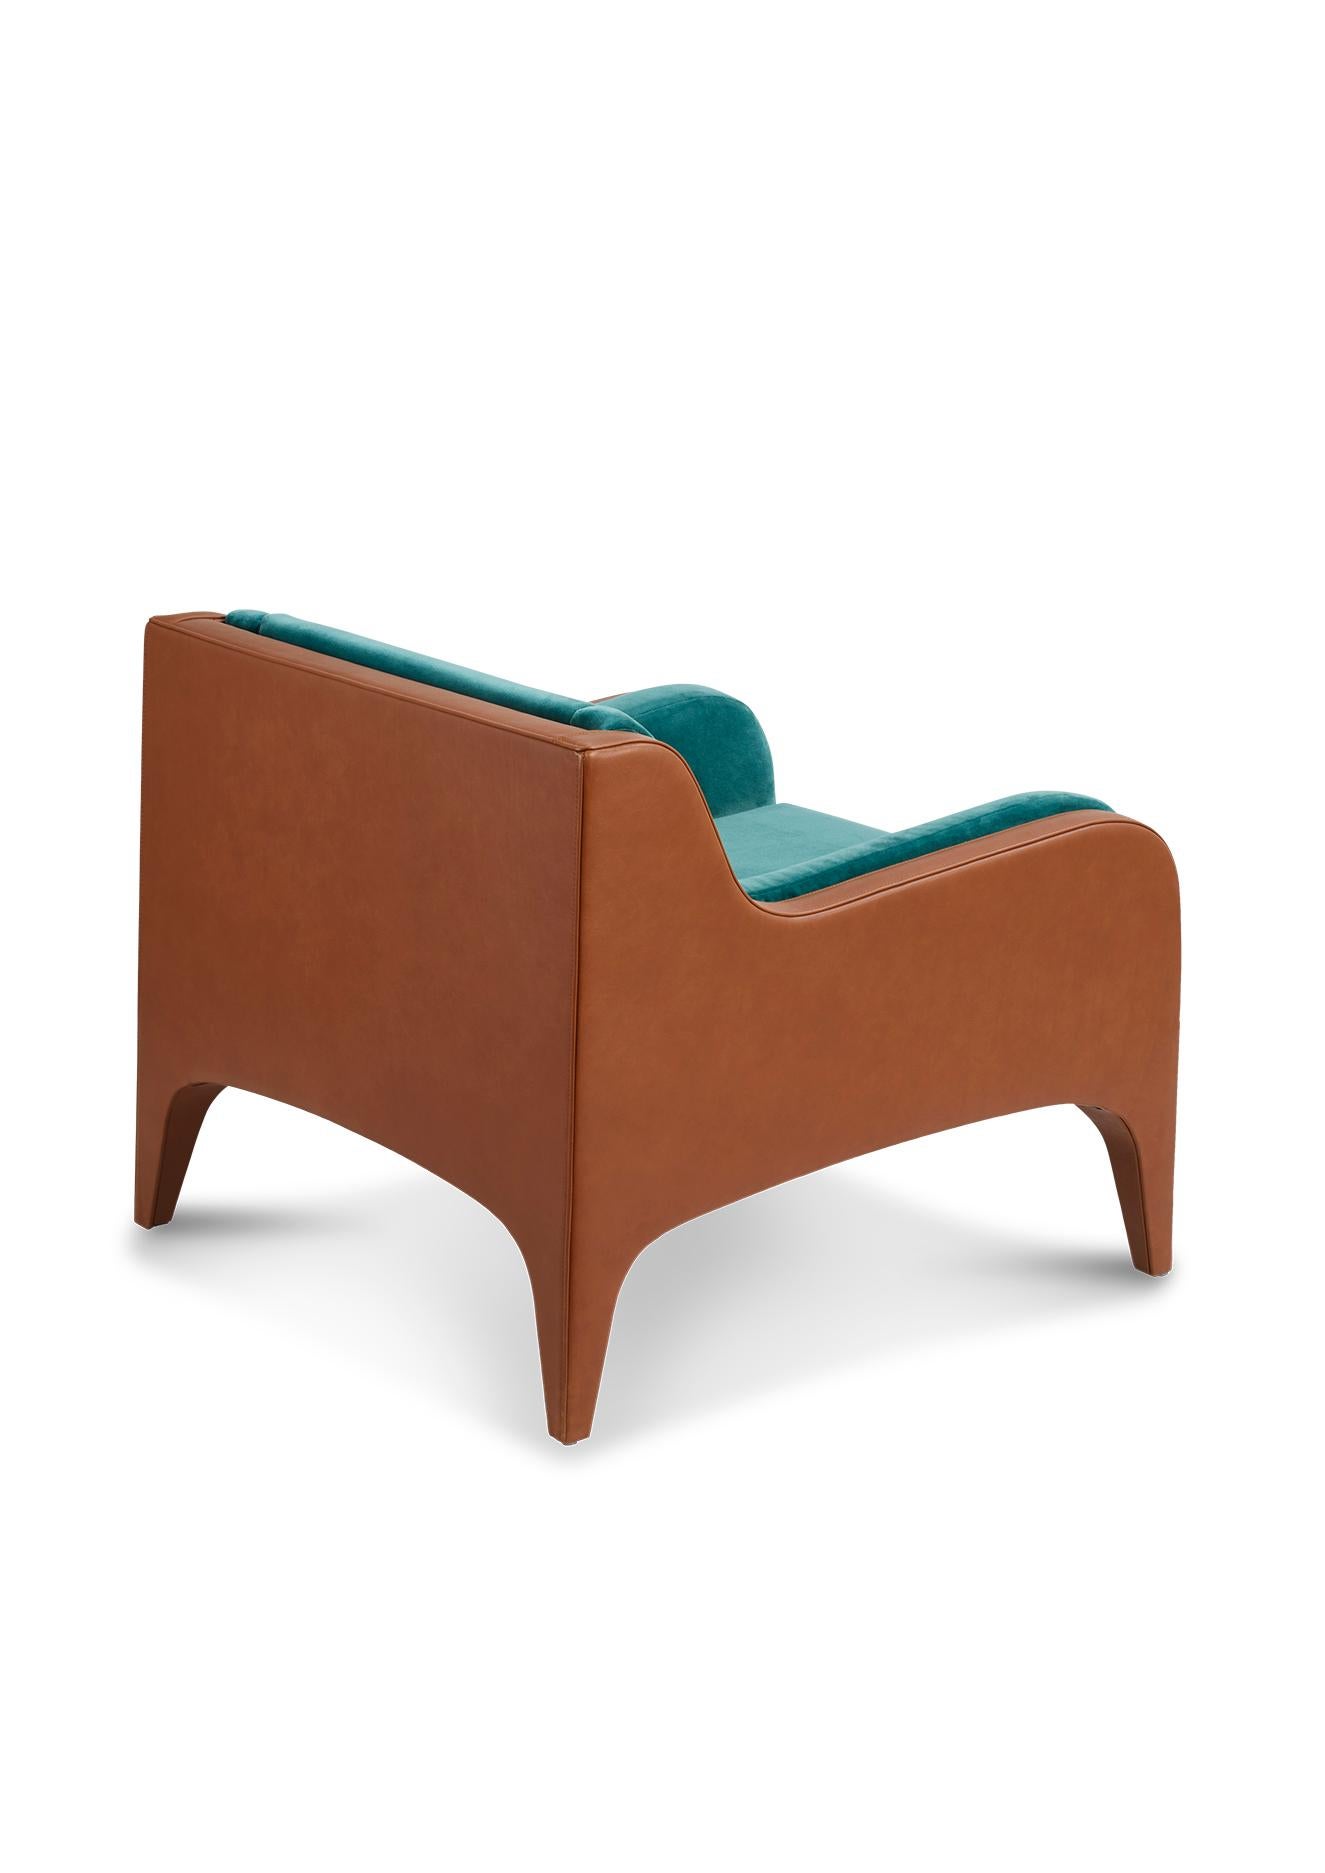 Armchair SEASON by Reda Amalou Design - Tabac Leather For Sale 6